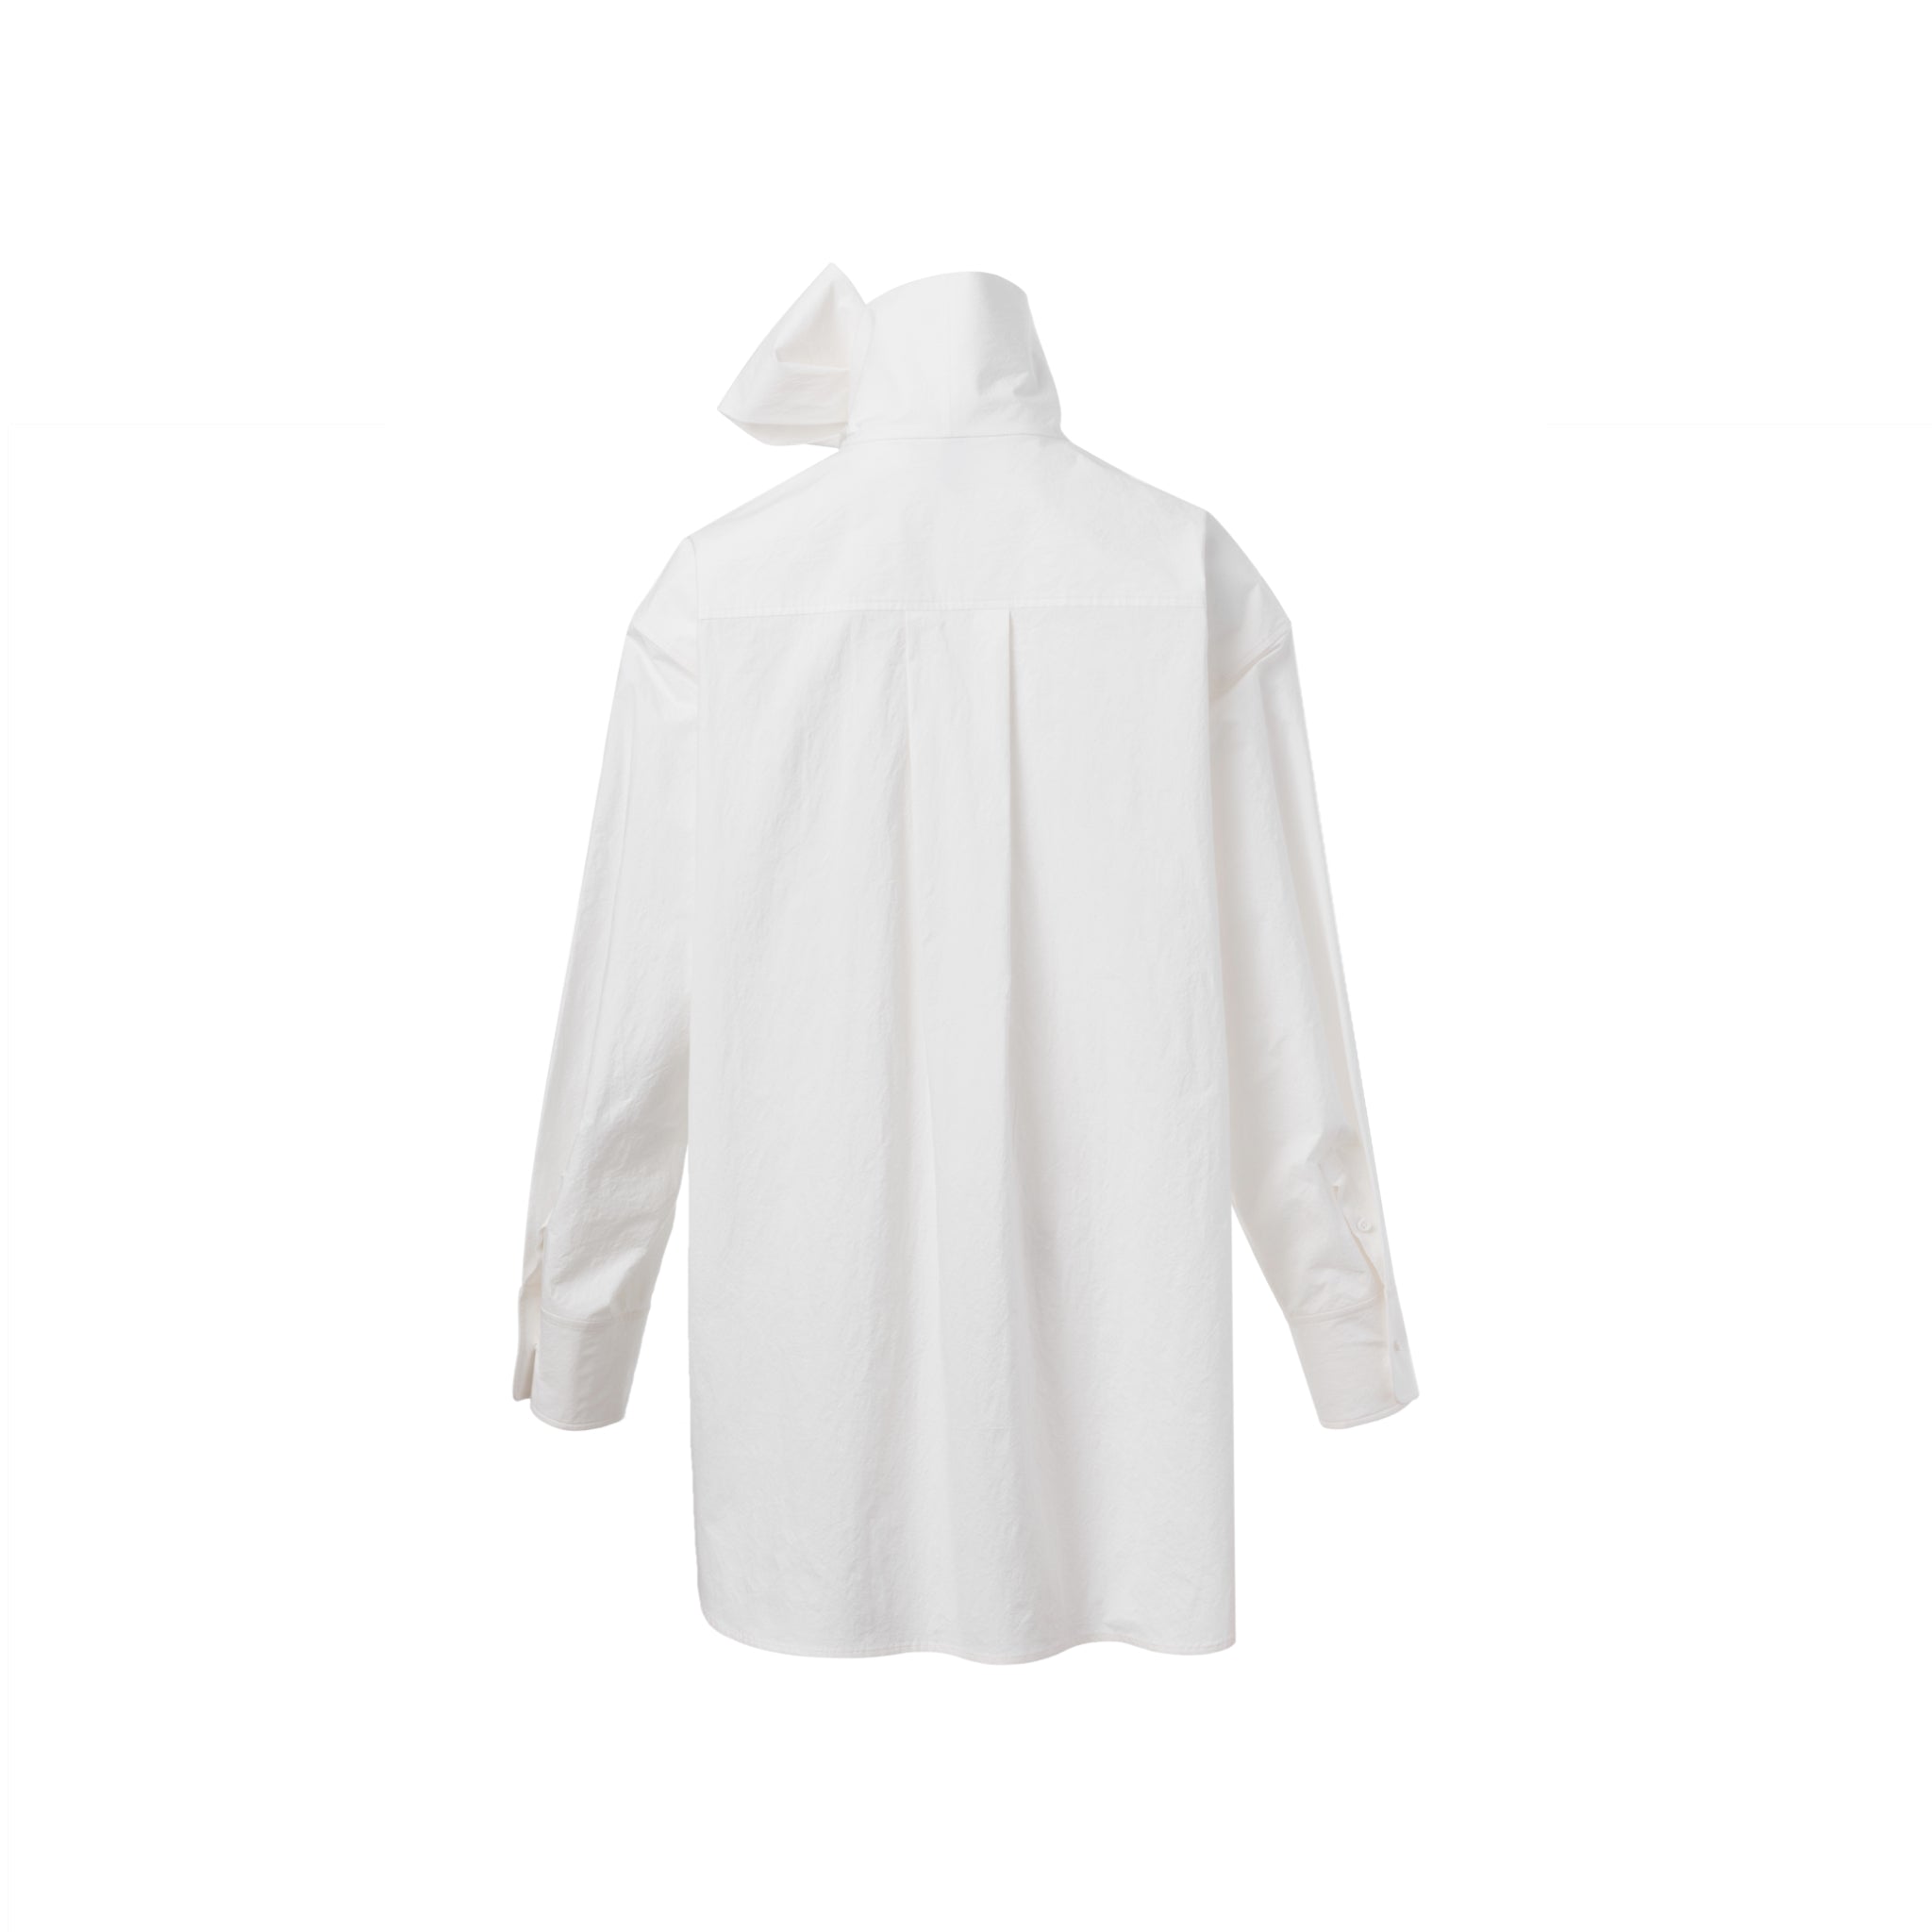 Ther. White Necktie loose fit shirt | MADA IN CHINA